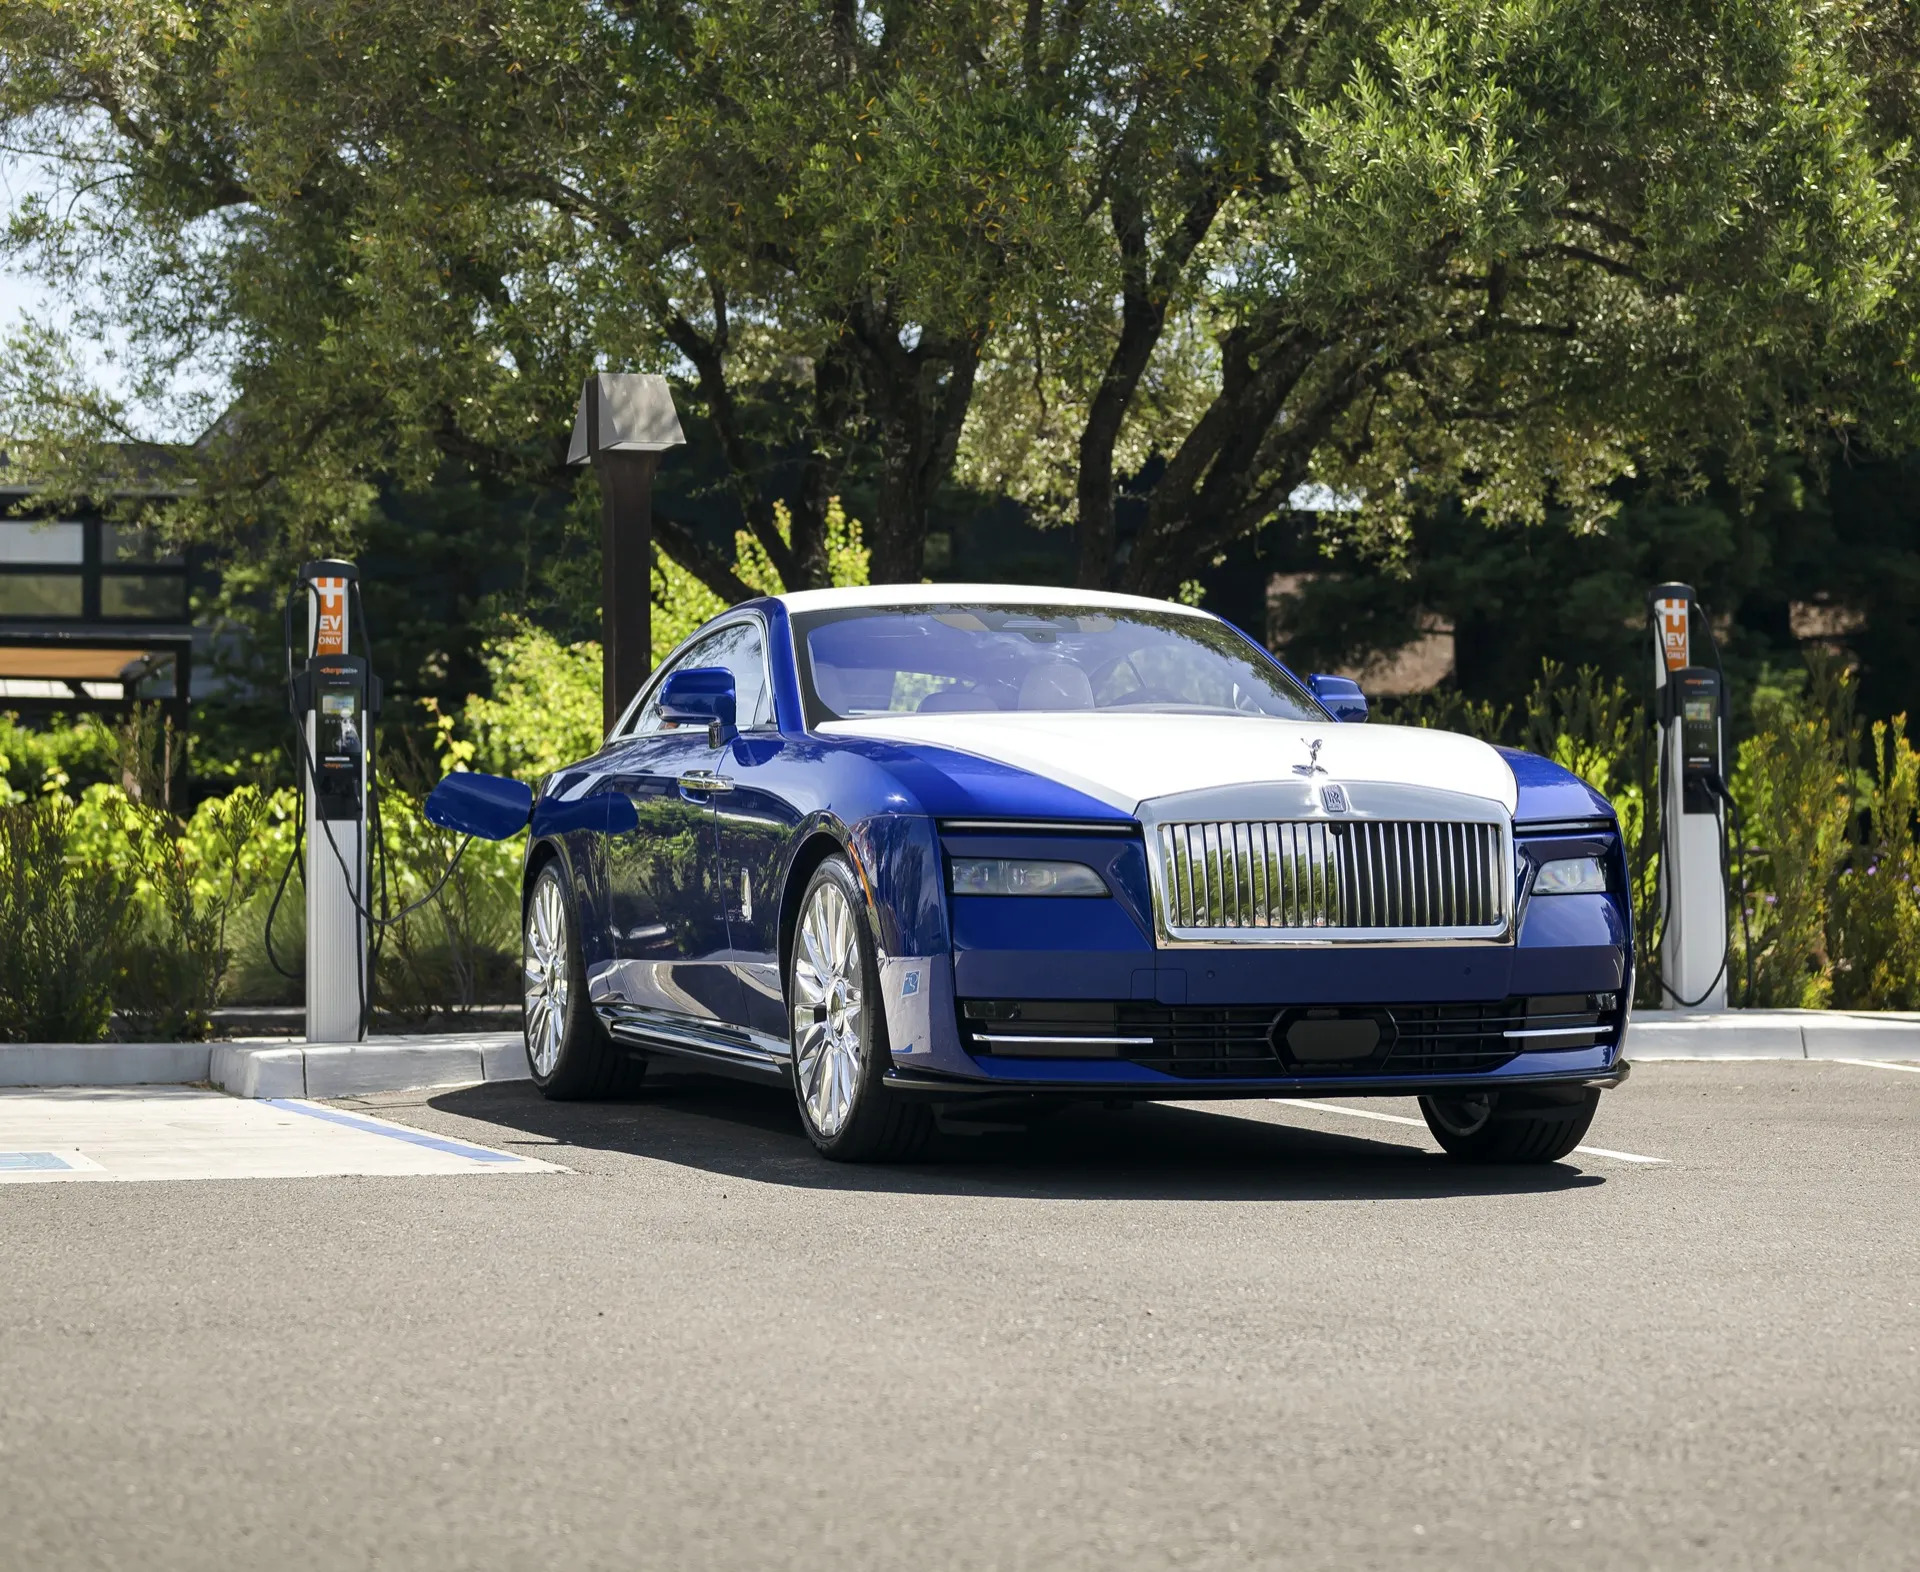 Rolls Royce Spectre expected to cost R10 million